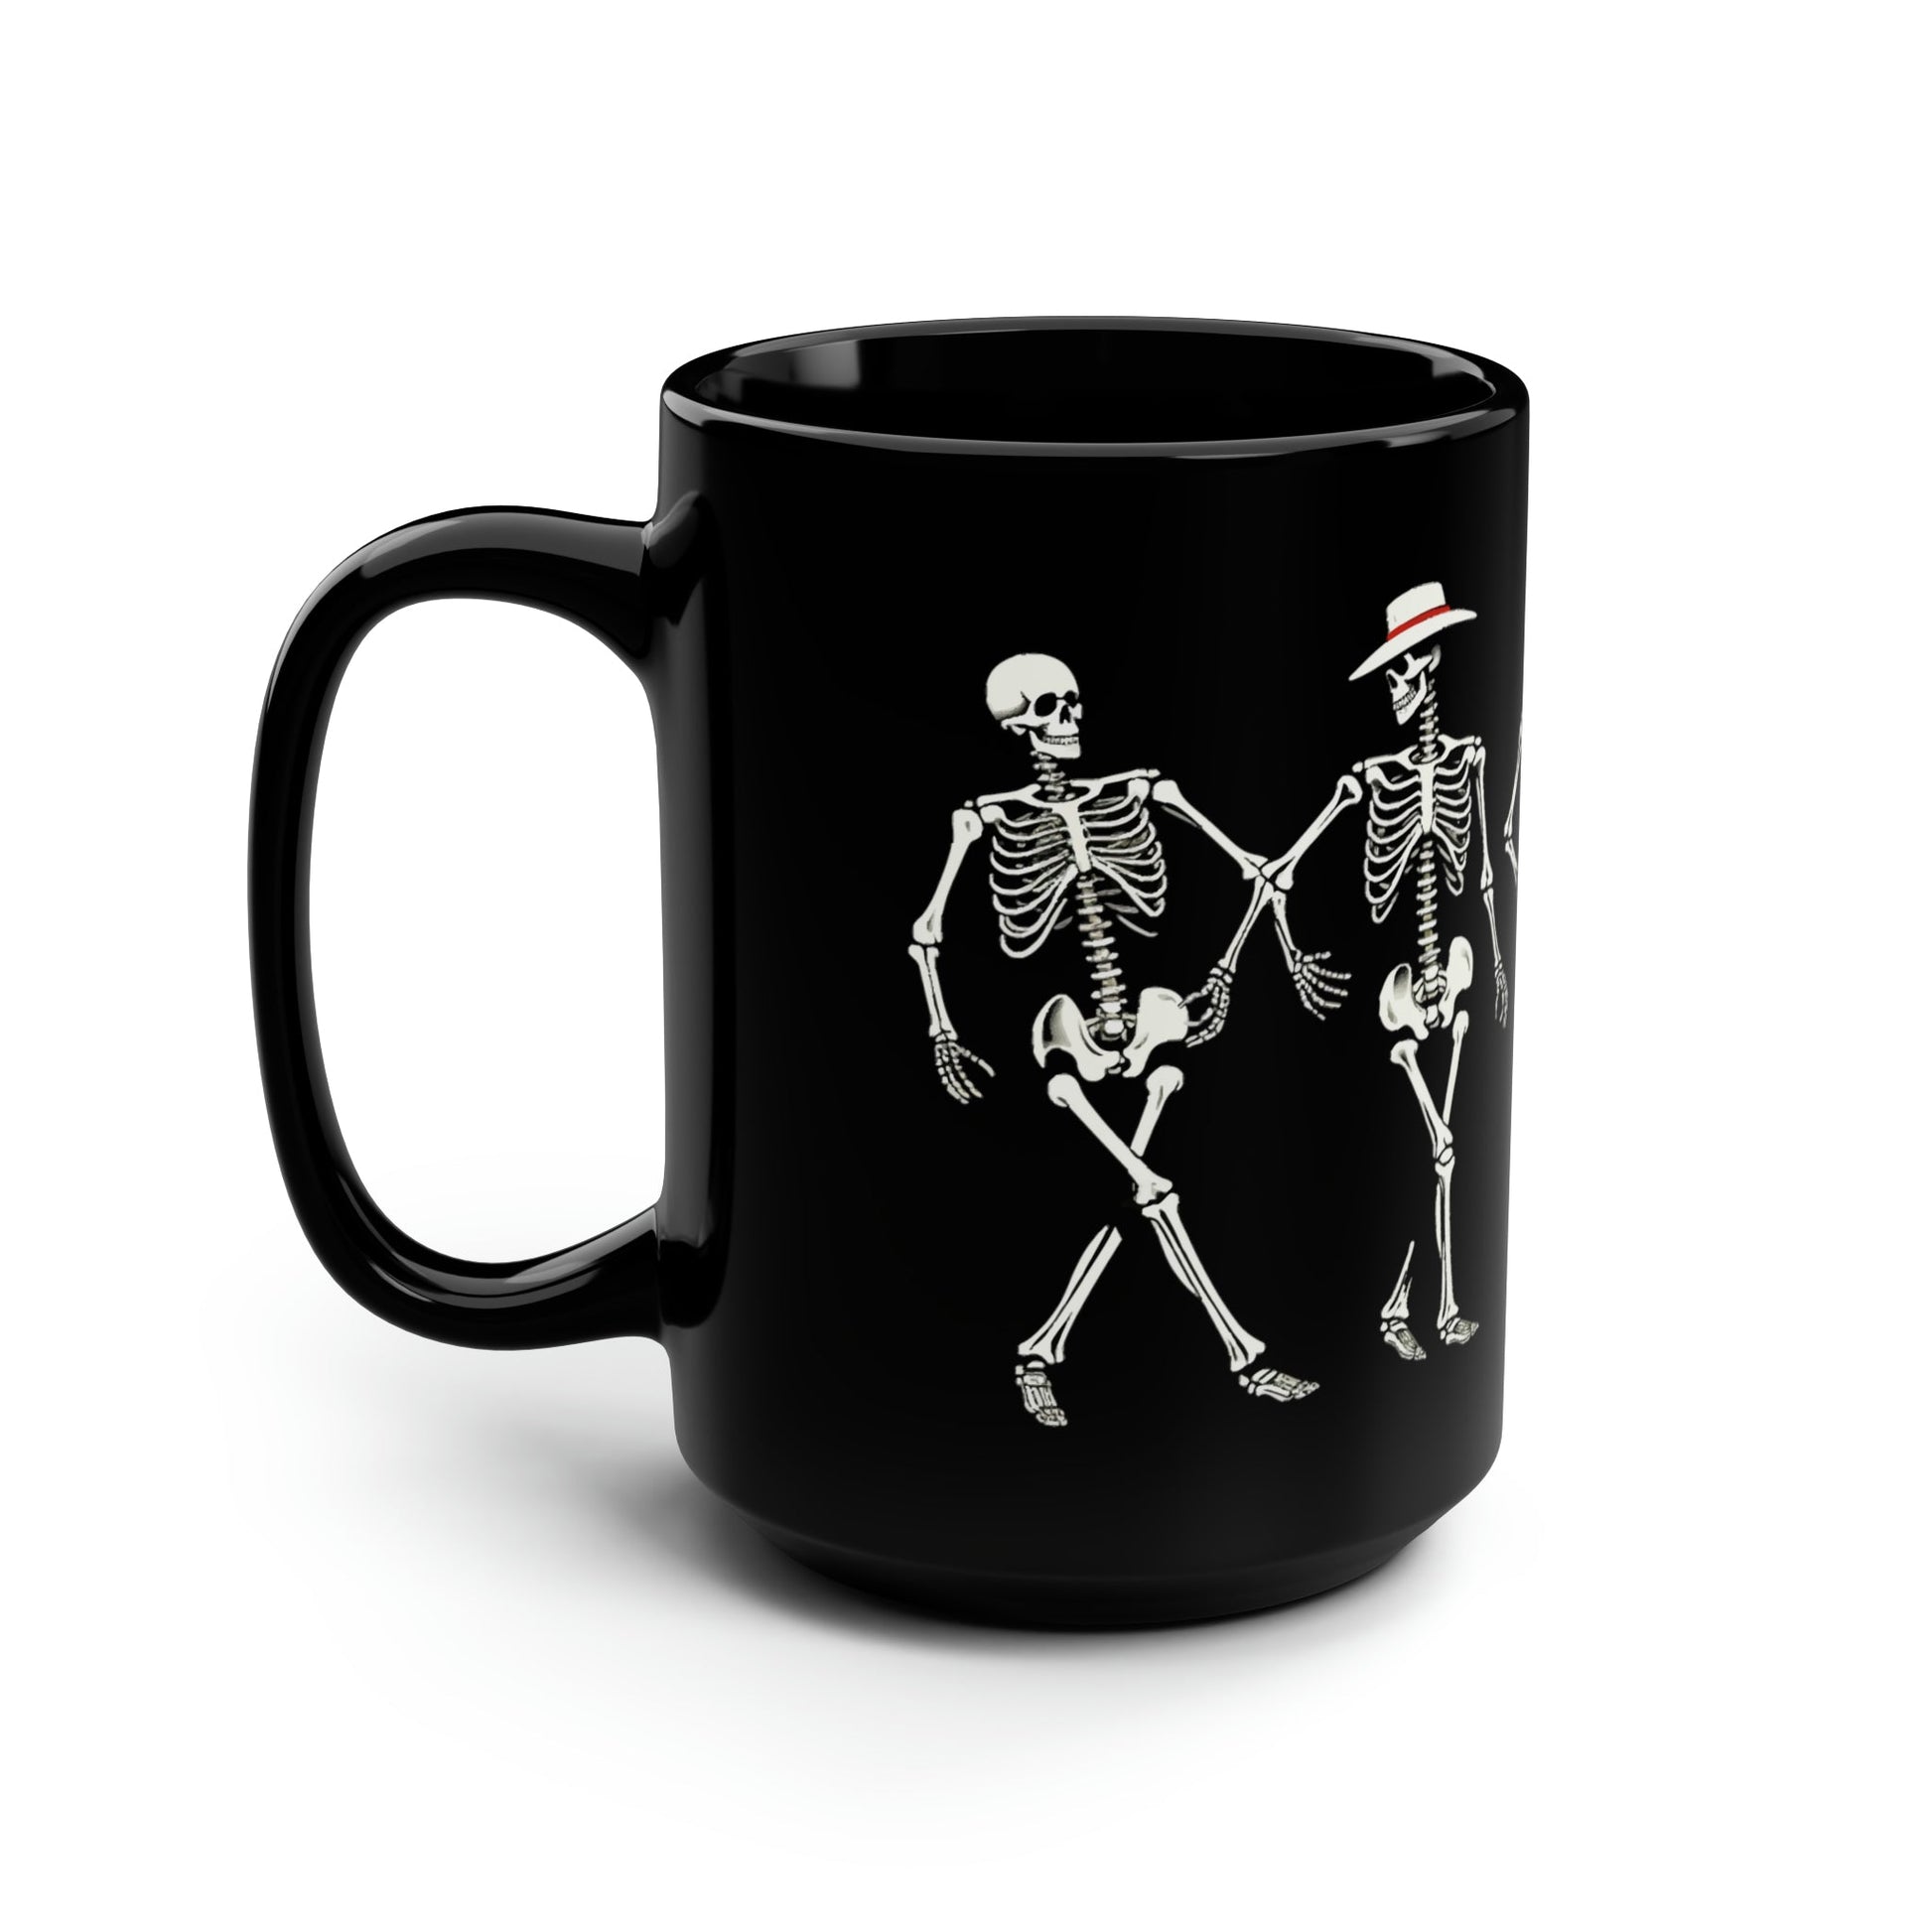 A side view of a black coffee mug with an image of dancing skeletons in hats printed on it.